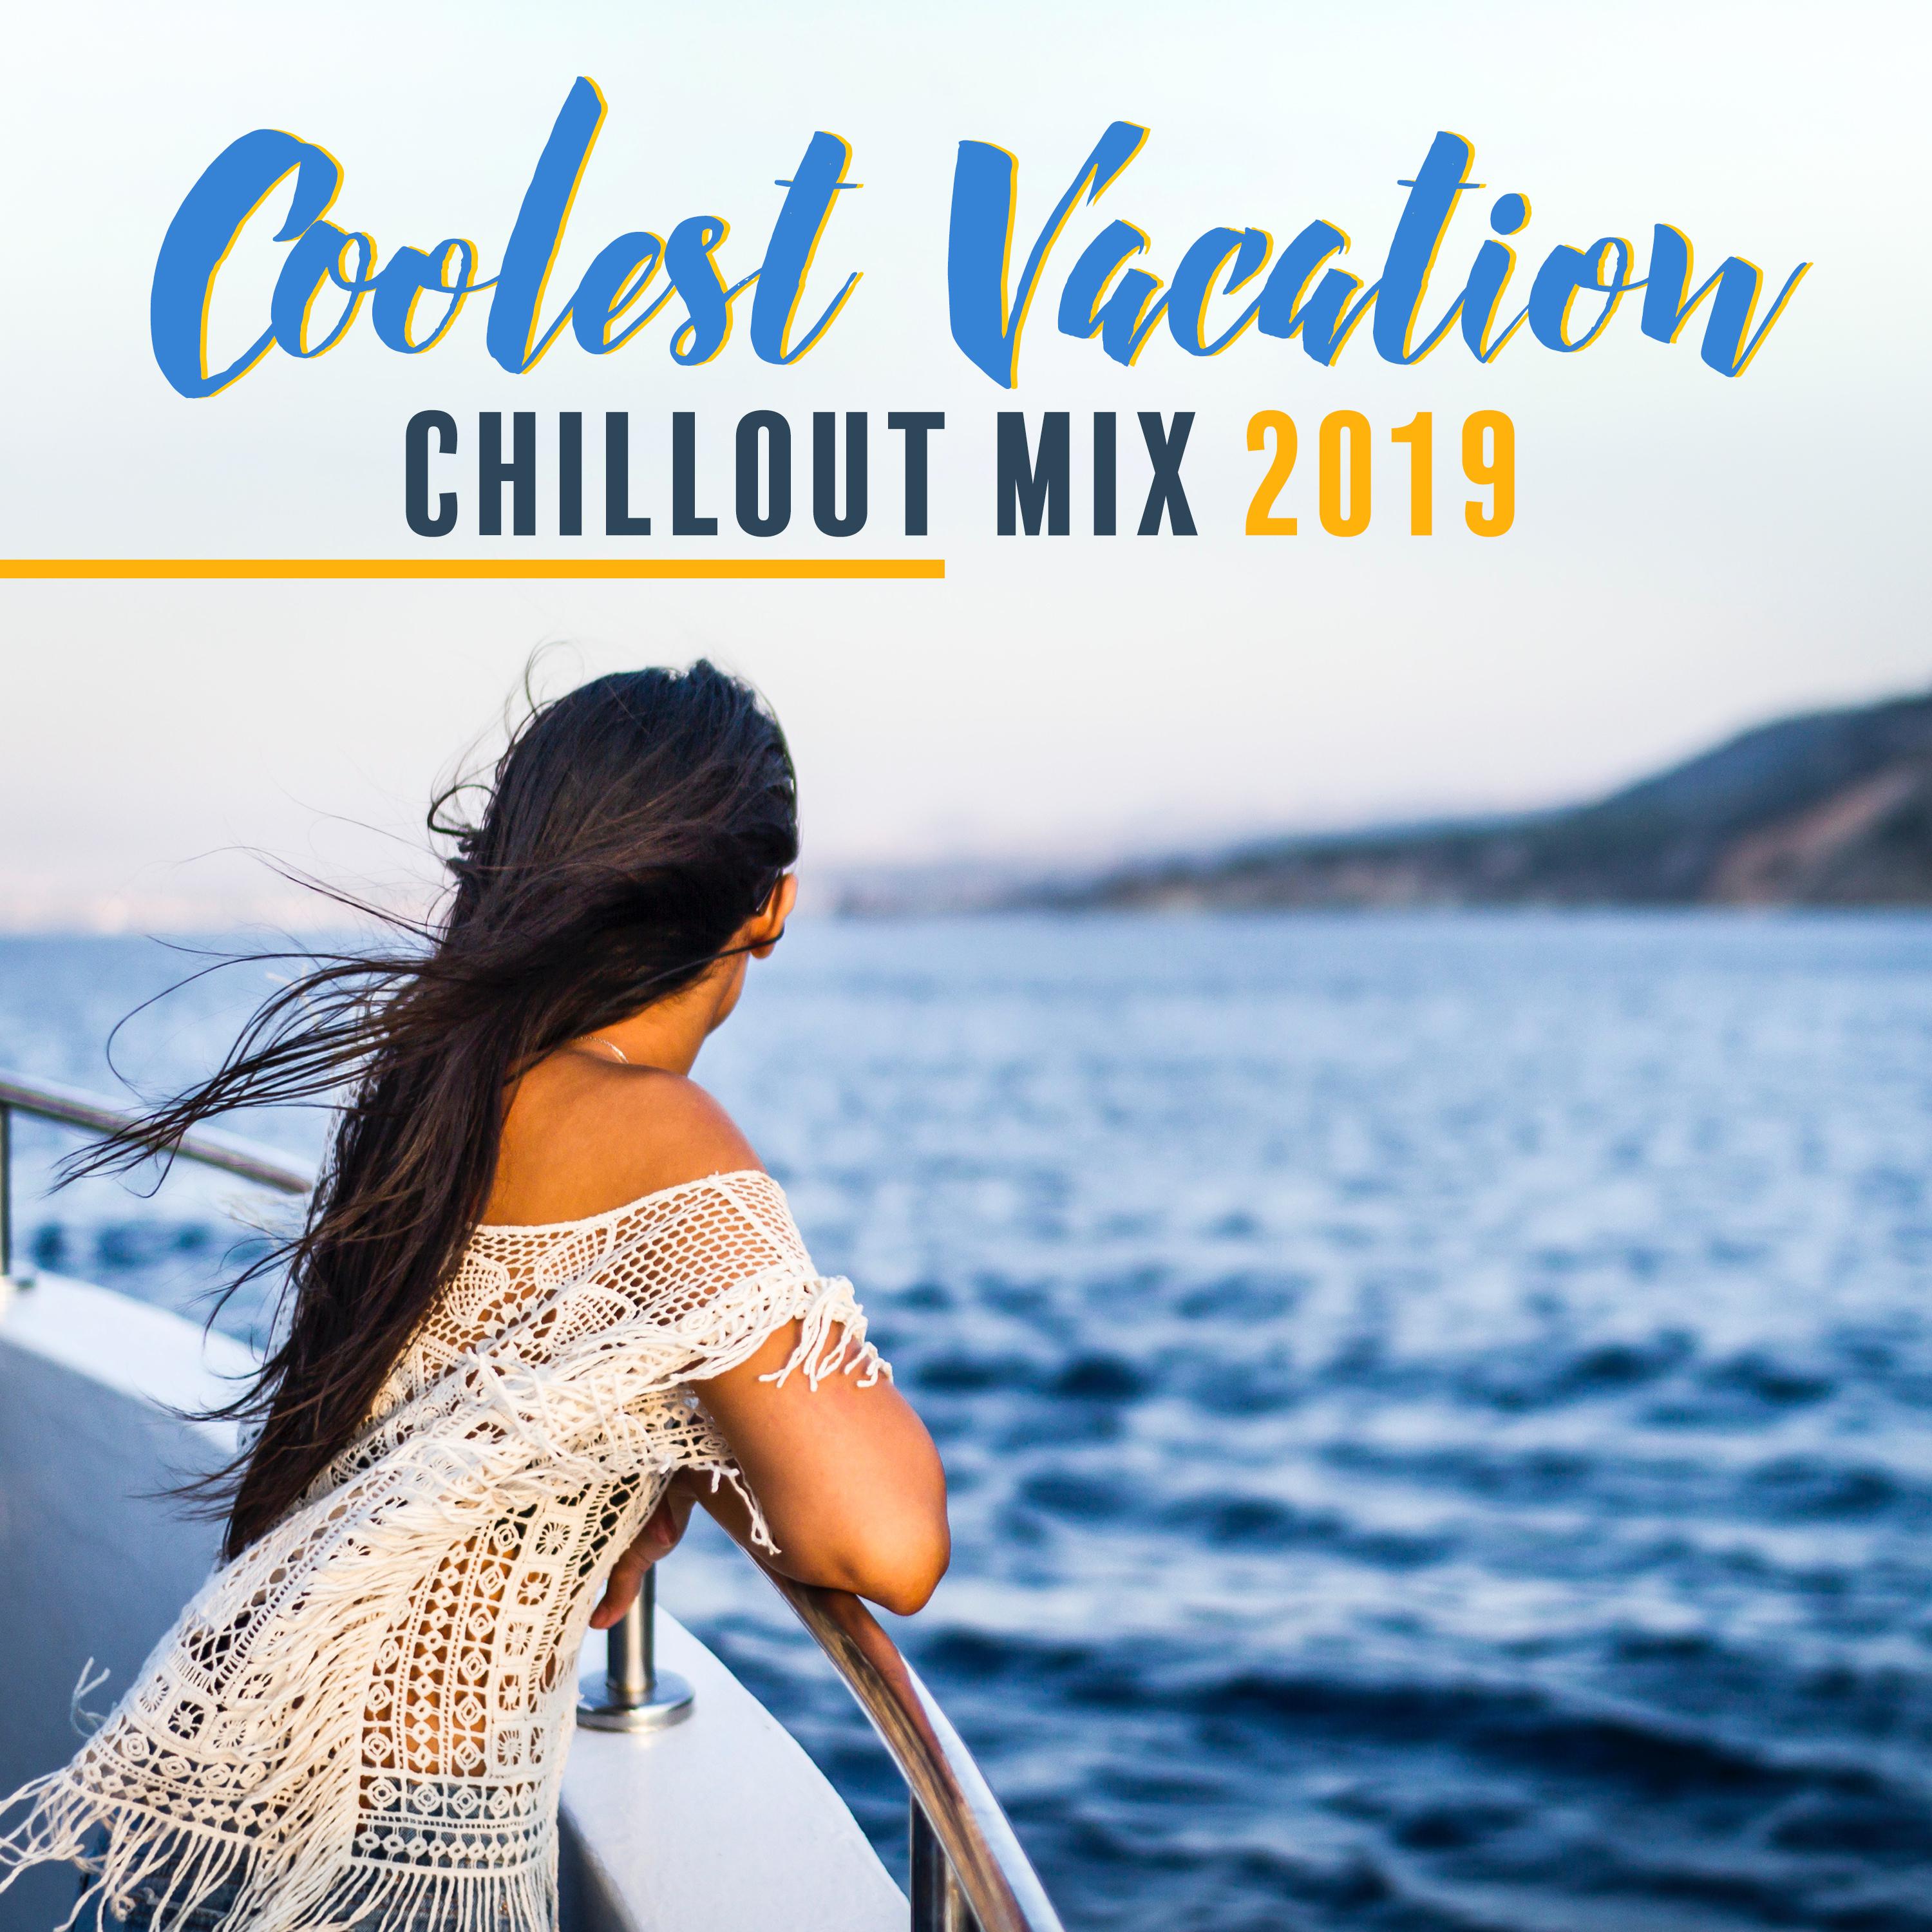 Coolest Vacation Chillout Mix 2019